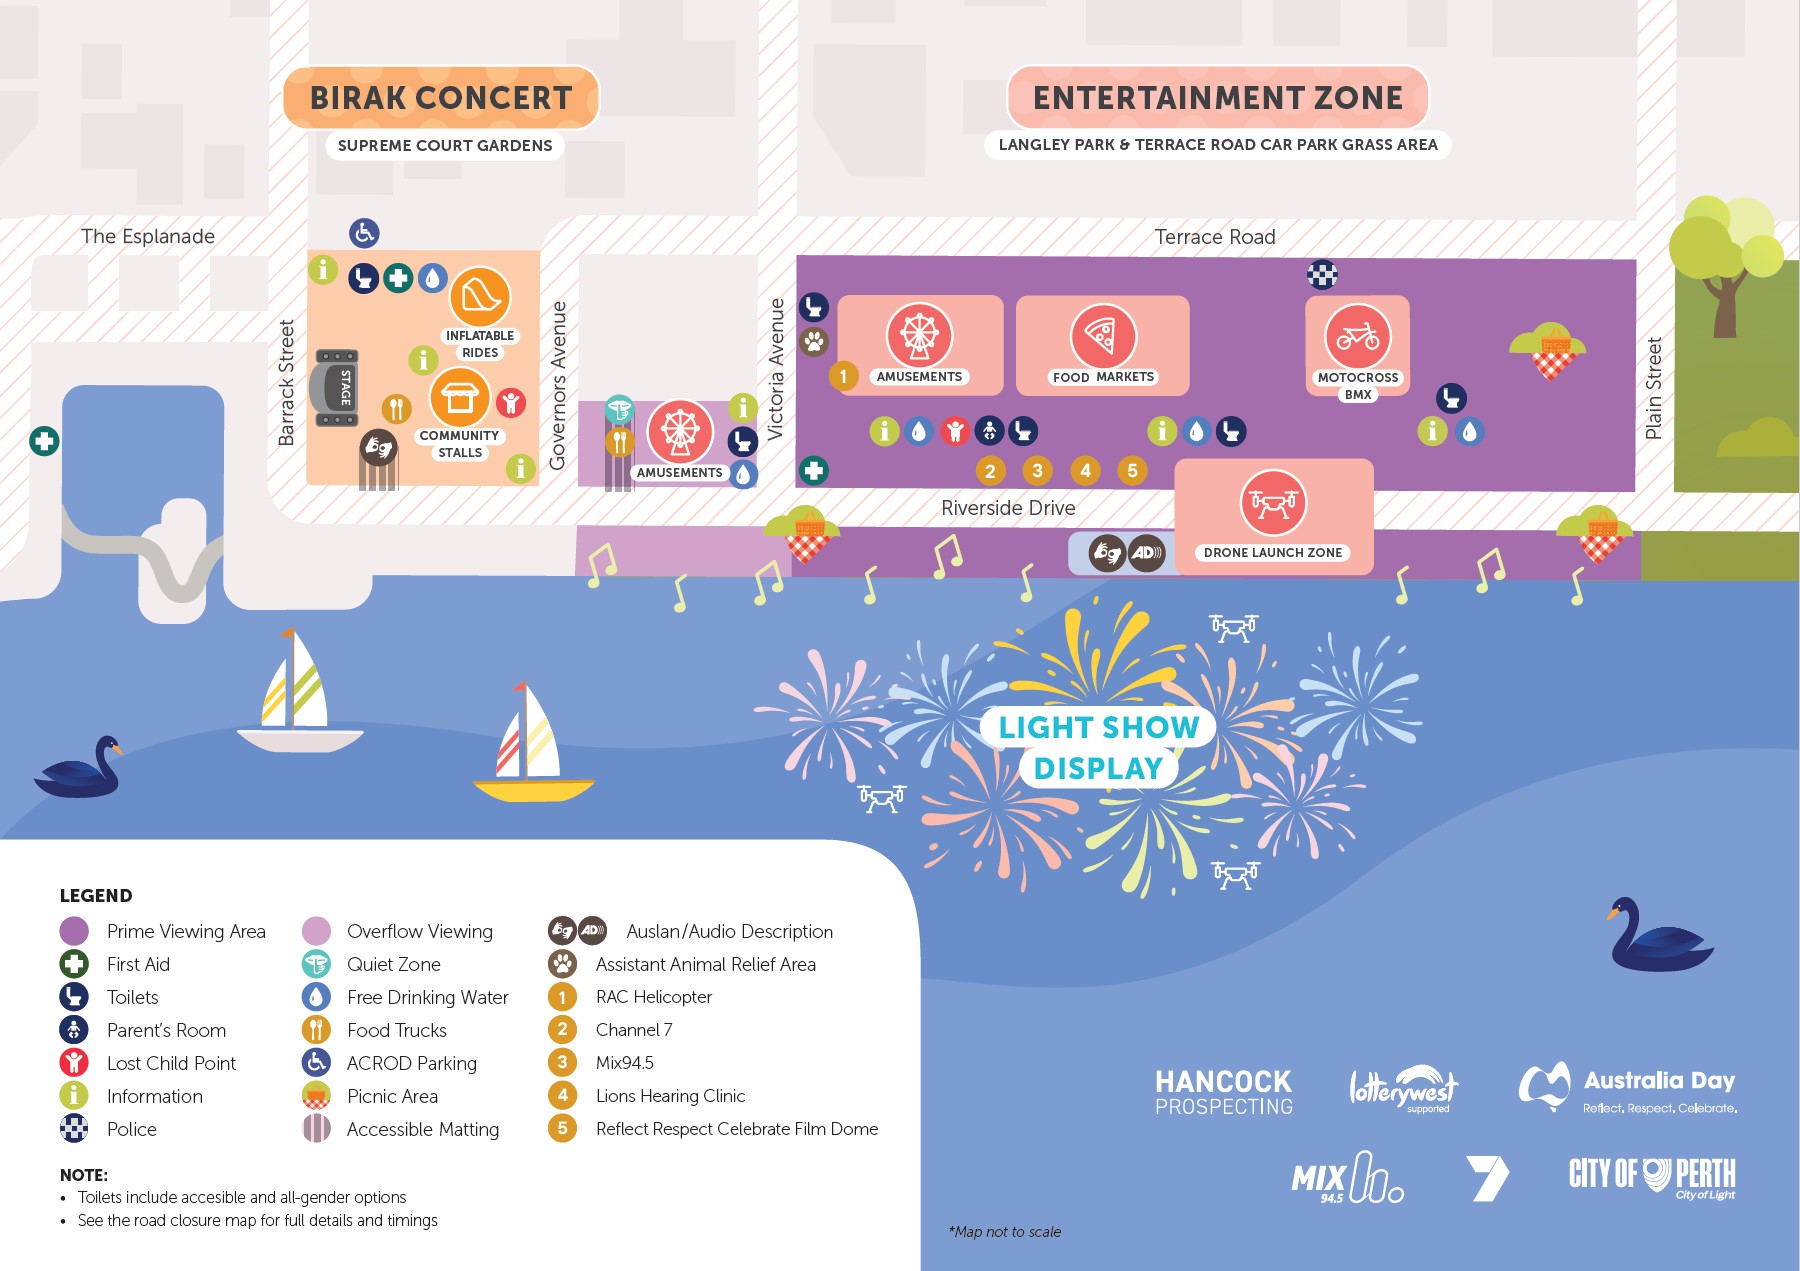 Entertainment Zone Map UPDATED 20 JAN 2023